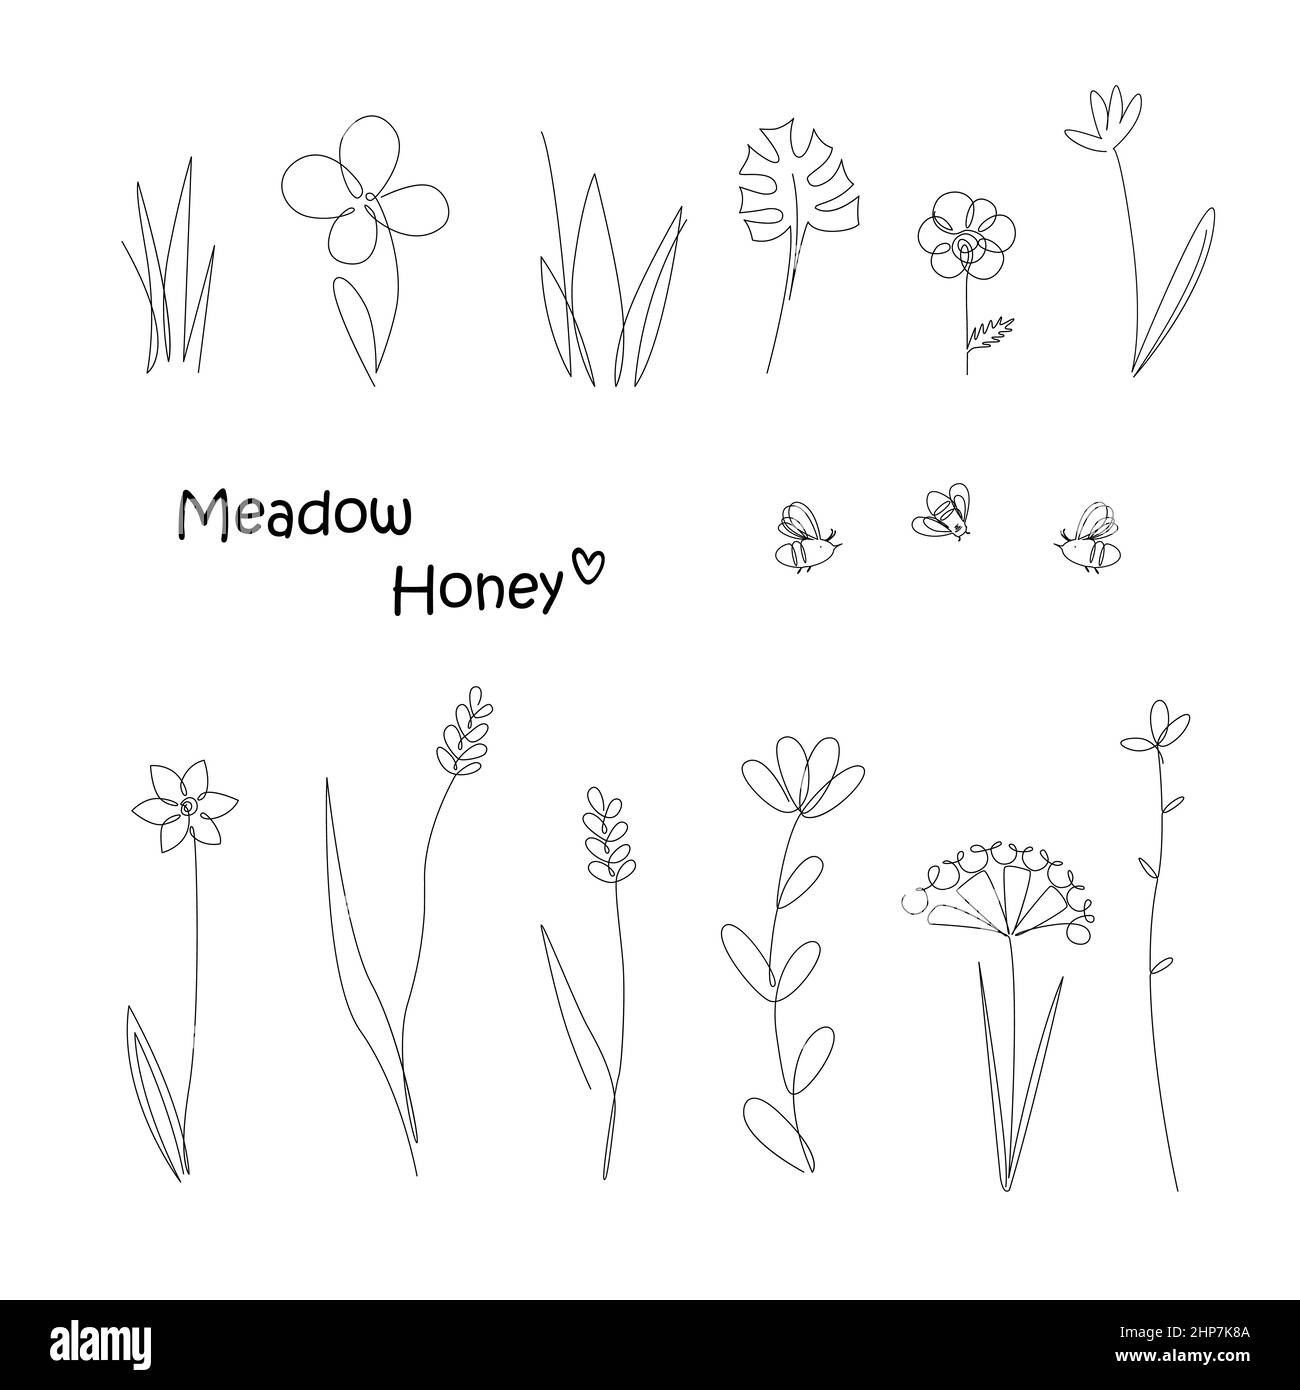 Continuous Line Drawing Set Of Meadow Plants and Bees. Honey Flowers Isolated on White Background, One Line Illustration. Vector Minimalist Prints Set Stock Vector